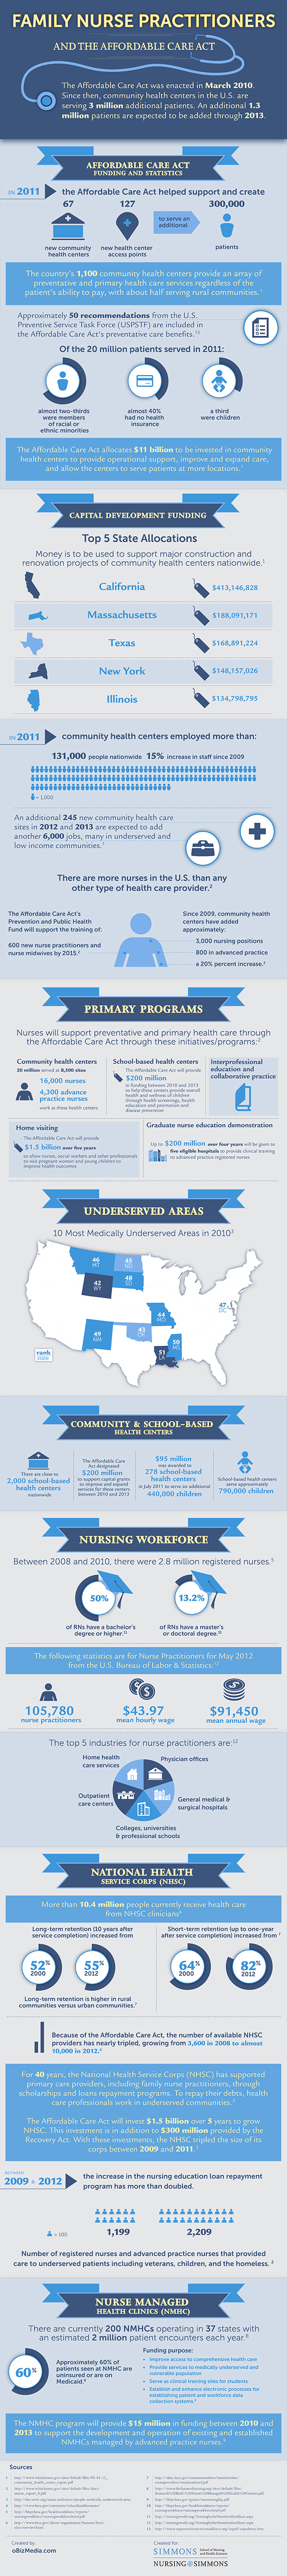 Facts-About-Nurse-Practitioners-with-the-Affordable-Care-Act